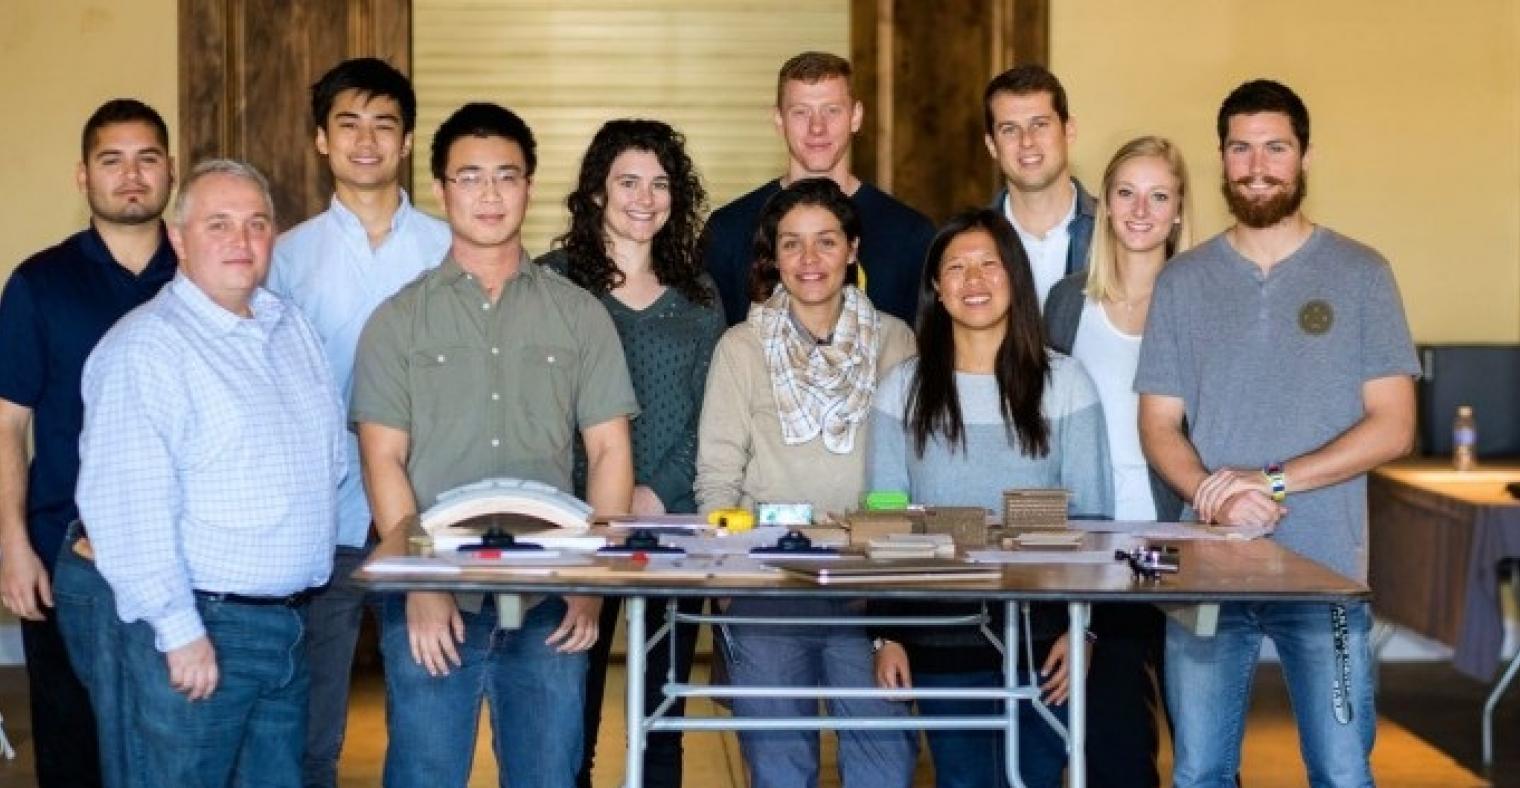 Specright’s partnership w/ Cal Poly San Luis Obispo allows the company to employ the university’s packaging students, while giving them the hands-on experience needed to excel in agtech. Specright&#039;s leadership team is pictured here with Cal Poyl students.